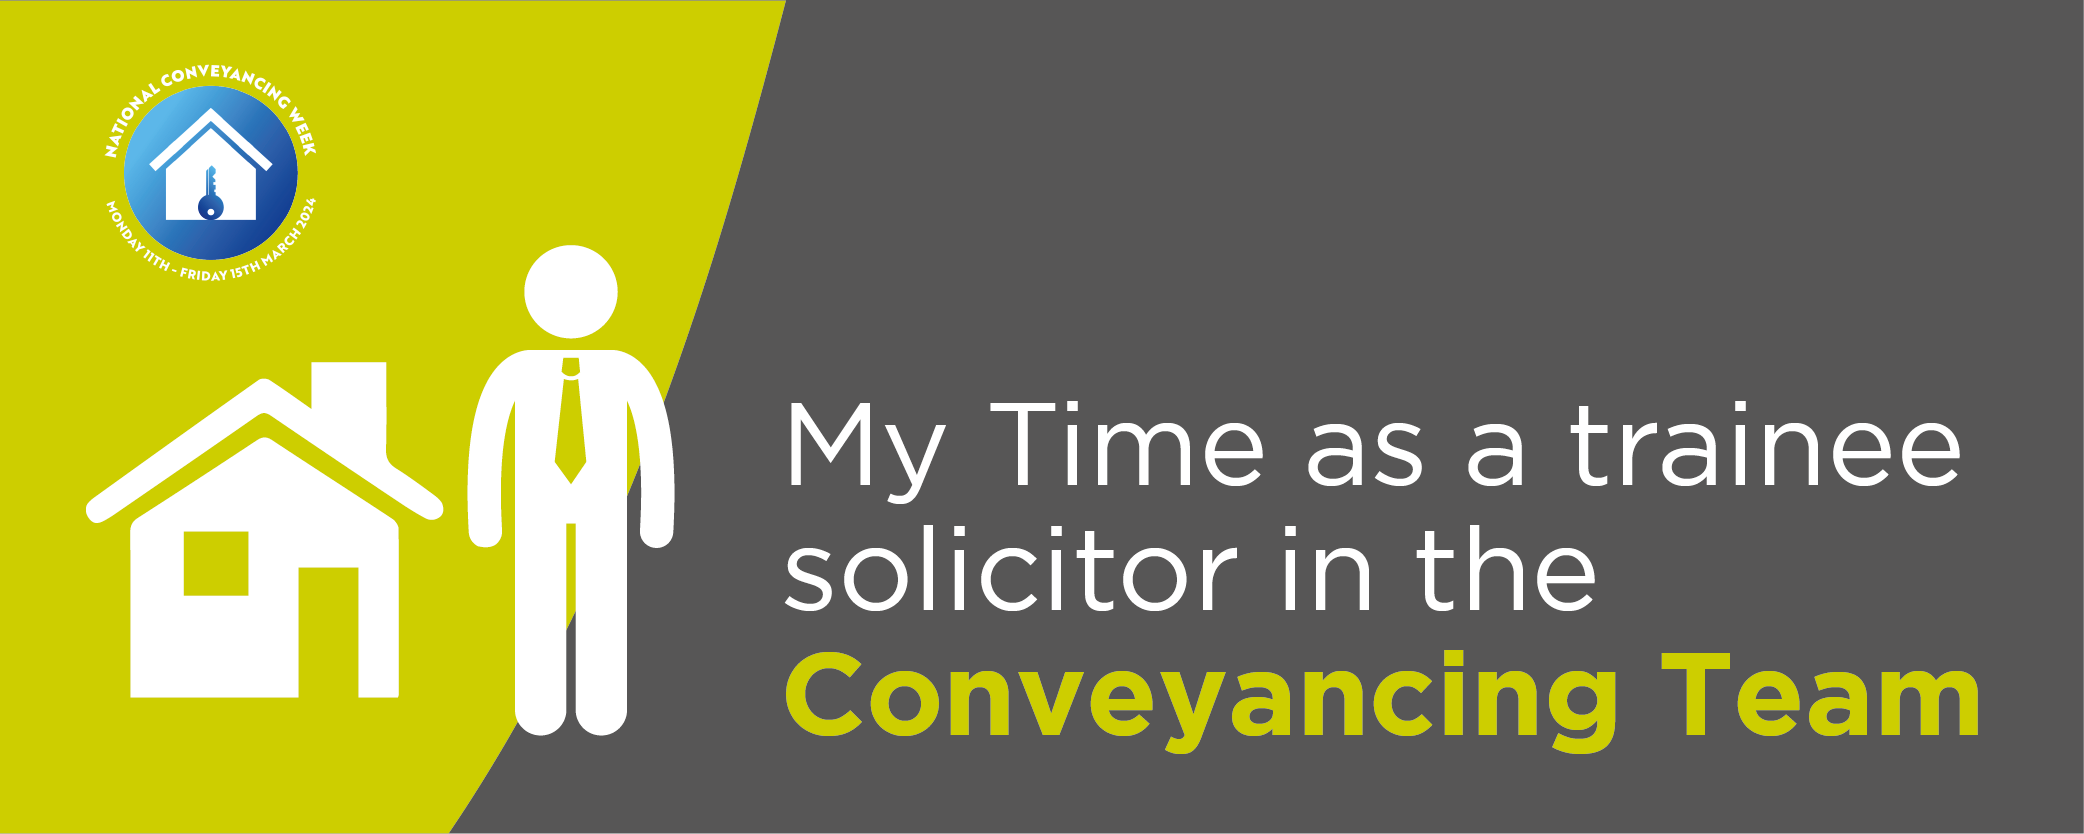 My time as a Trainee Solicitor in the Conveyancing Team